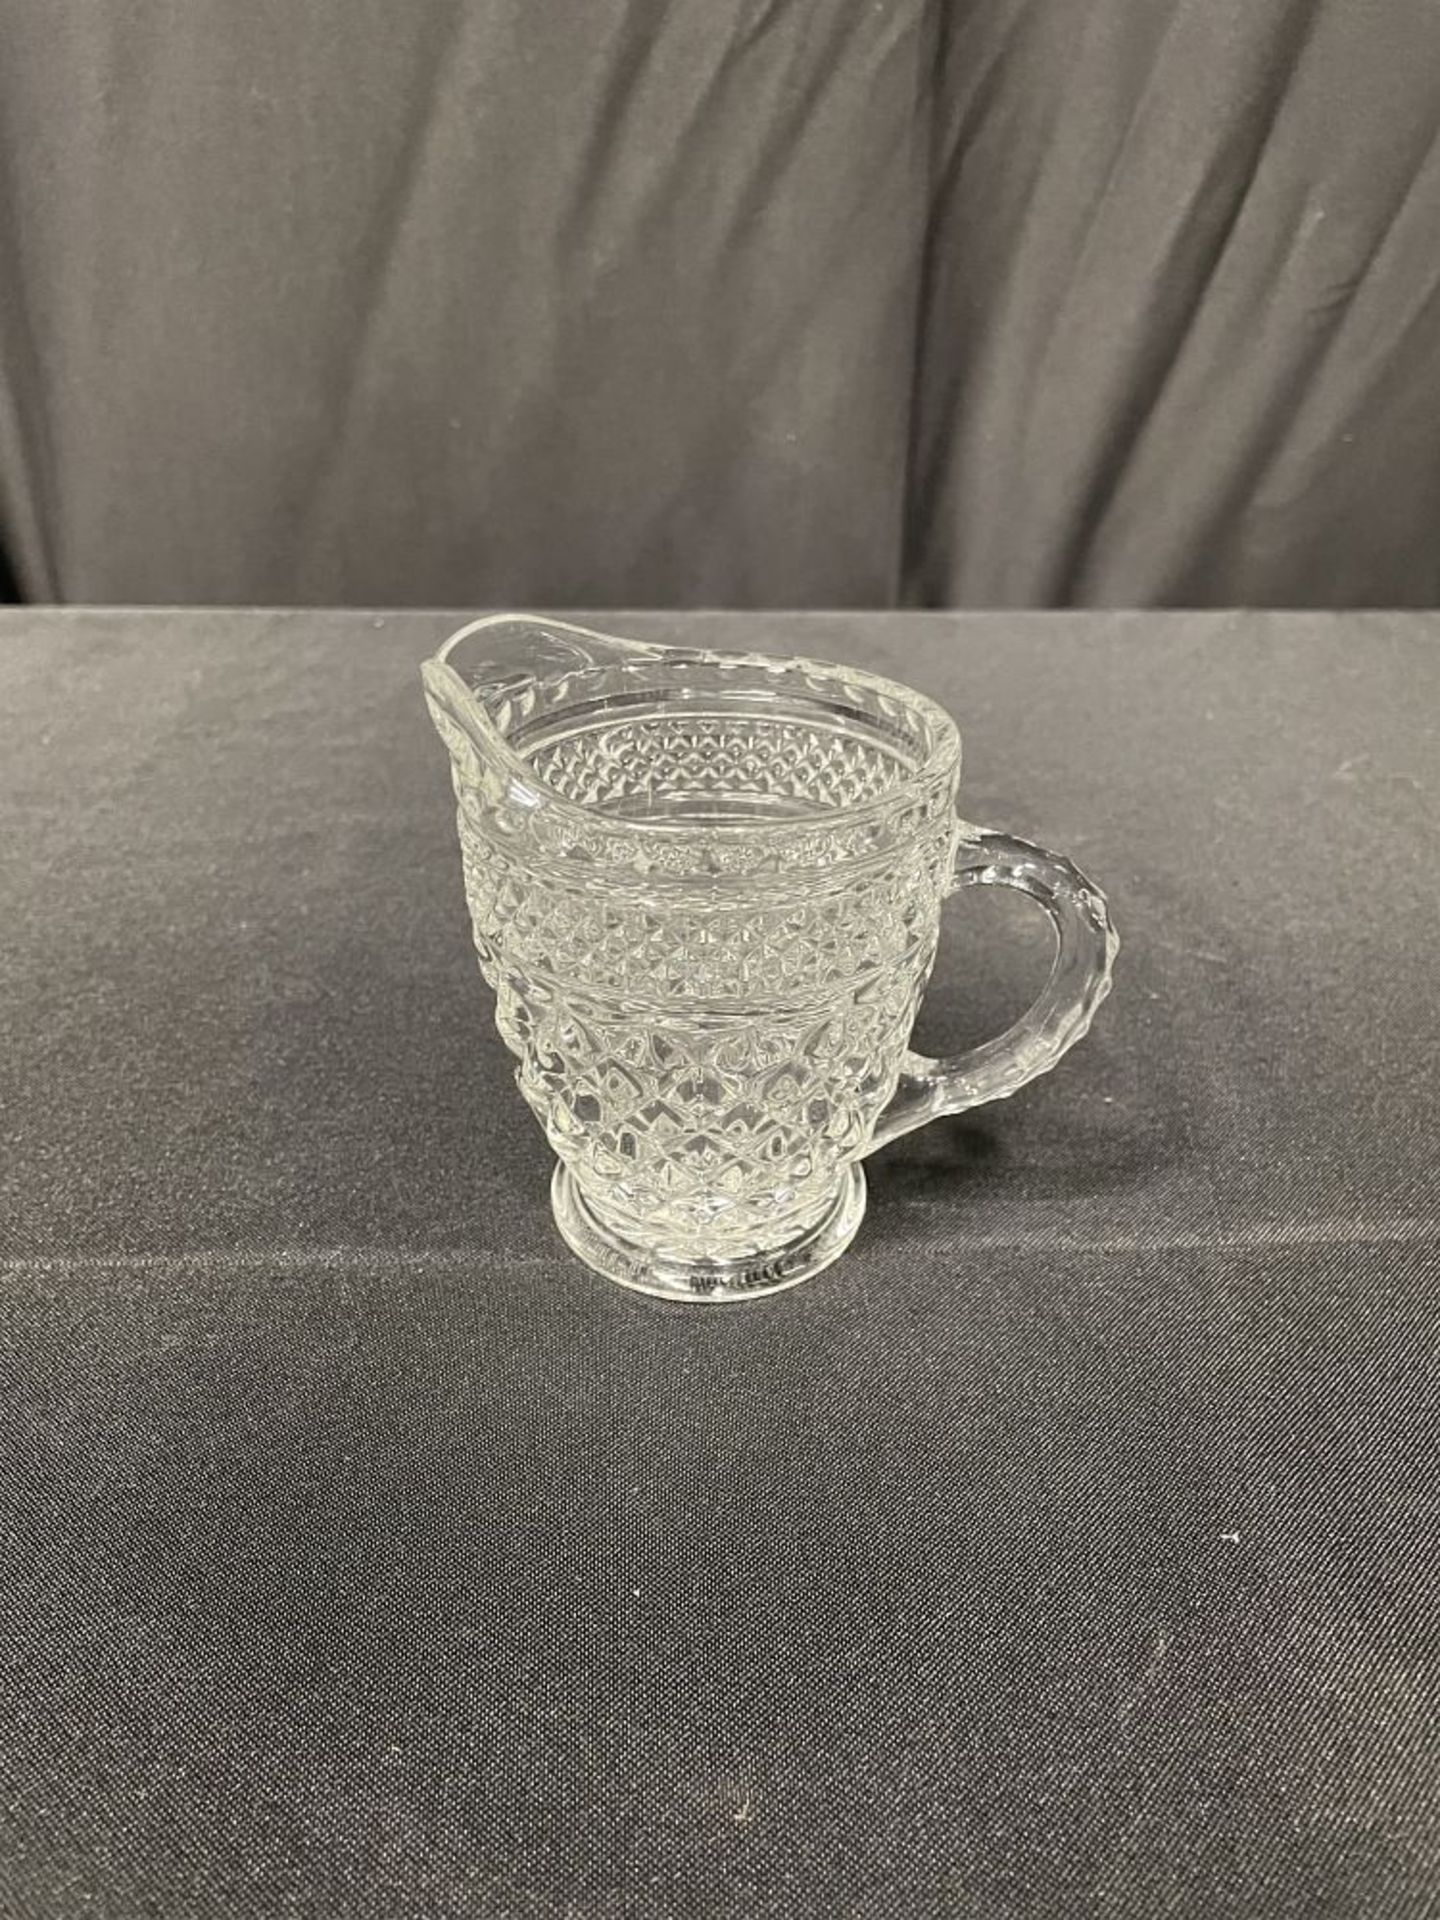 CREAMER, ETCHED GLASS